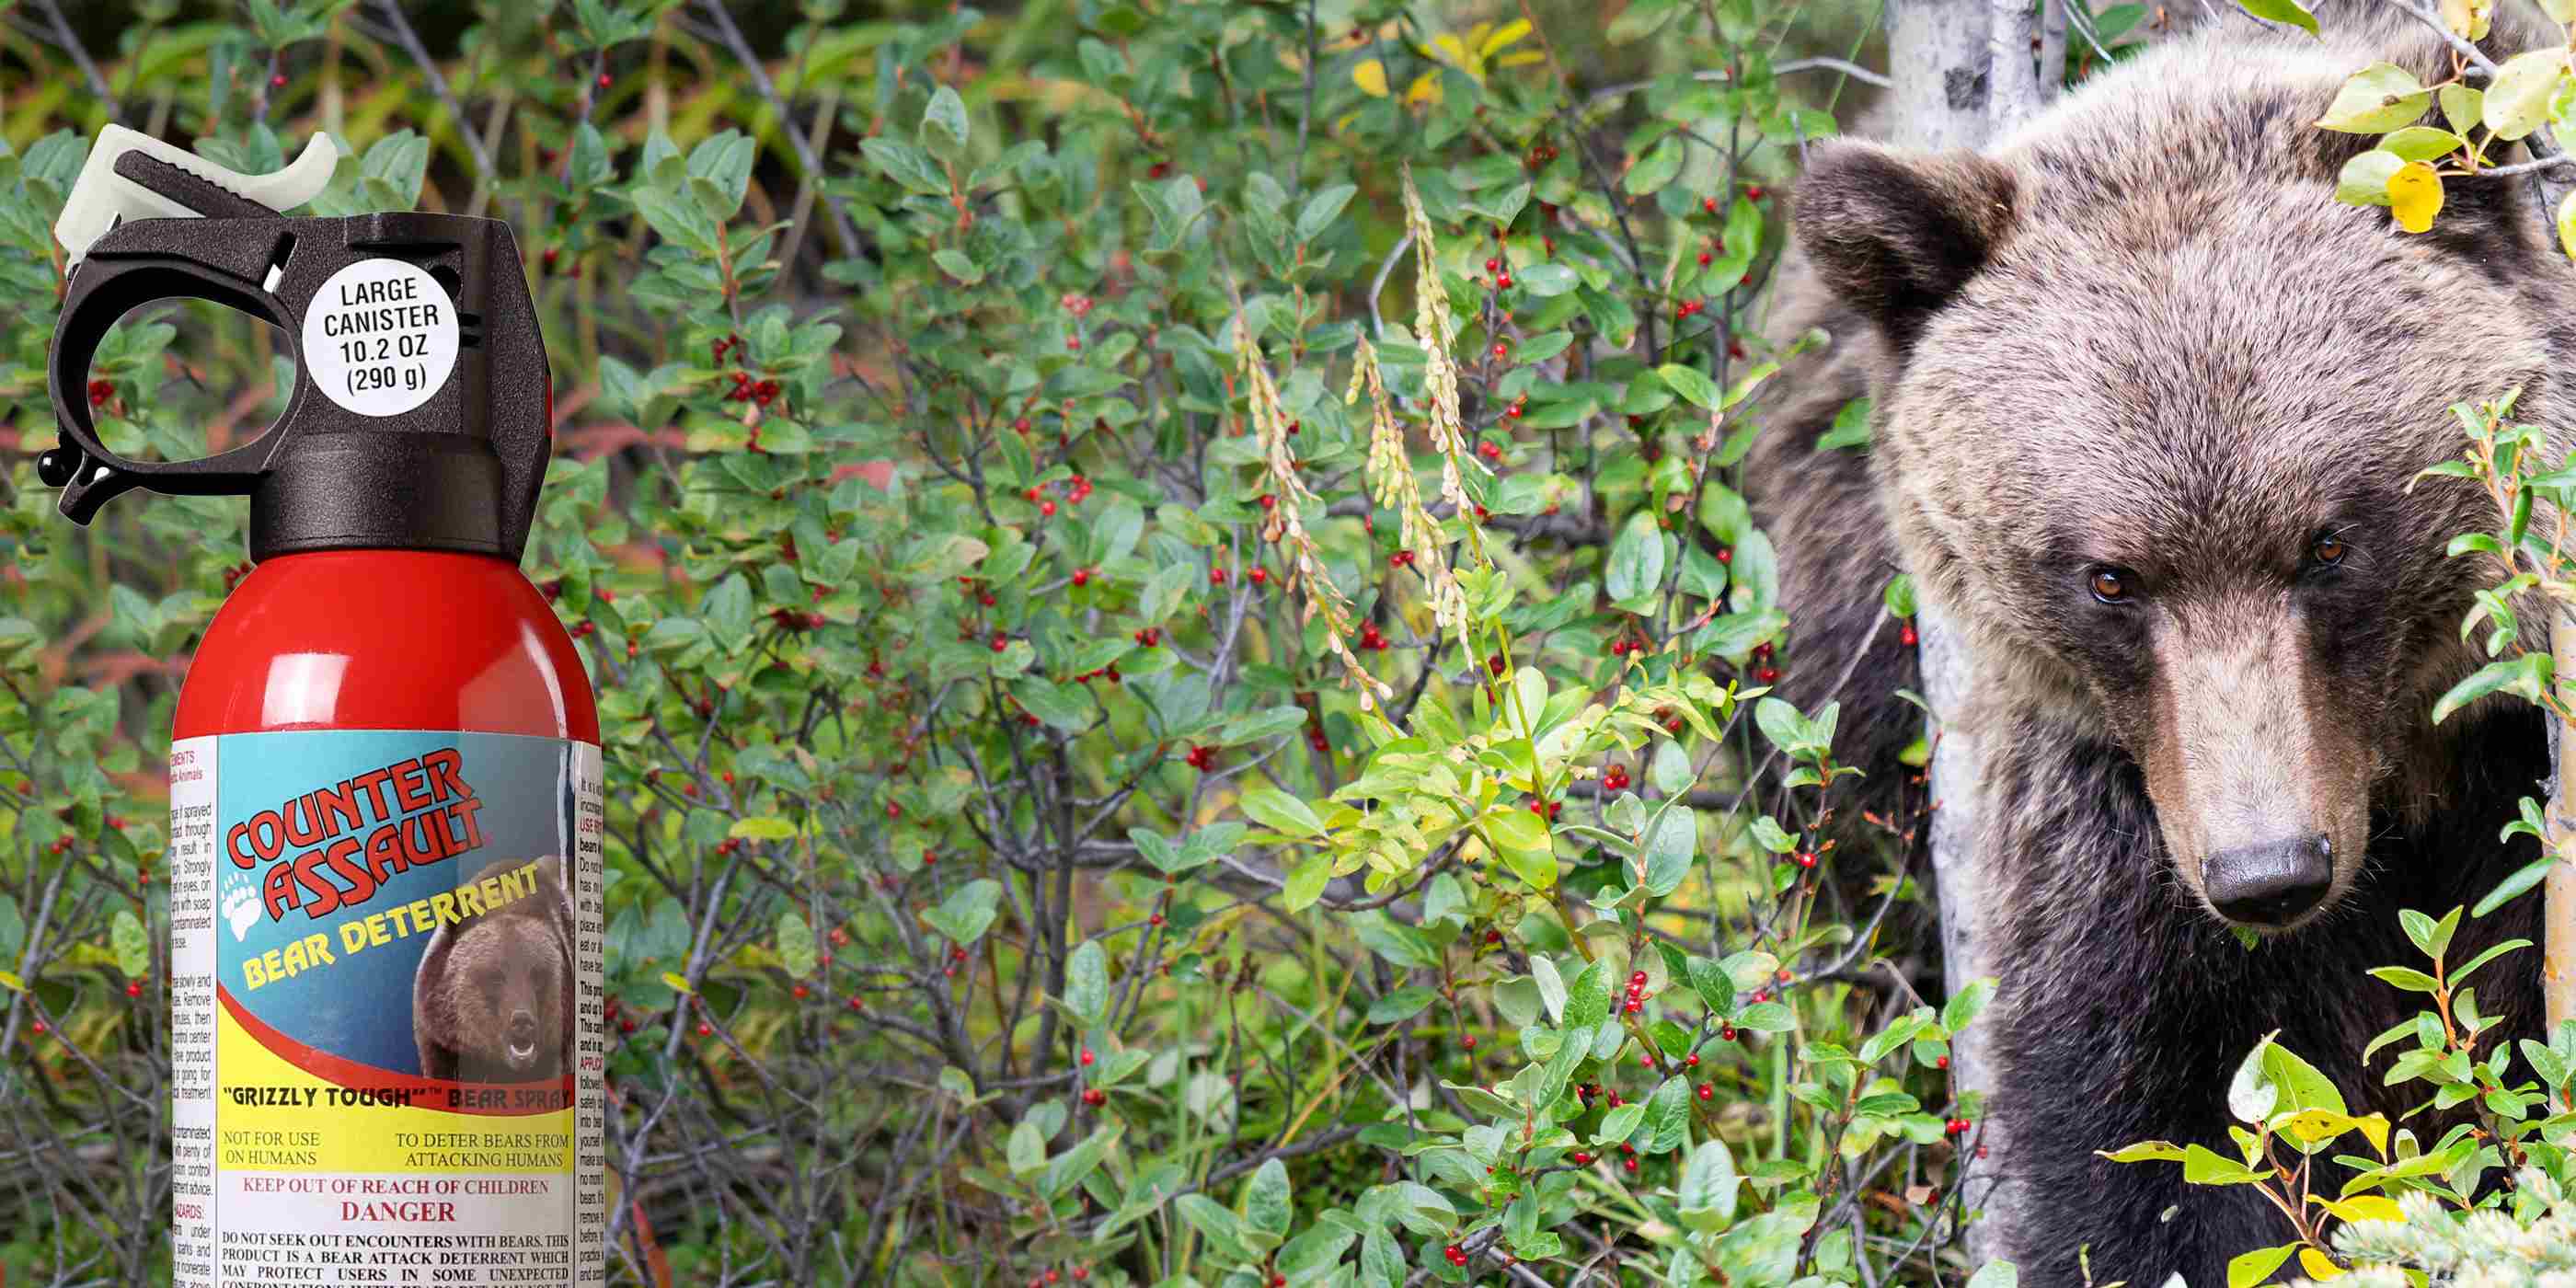 Grizzly bear in brush and Counter Assault bear spray can.